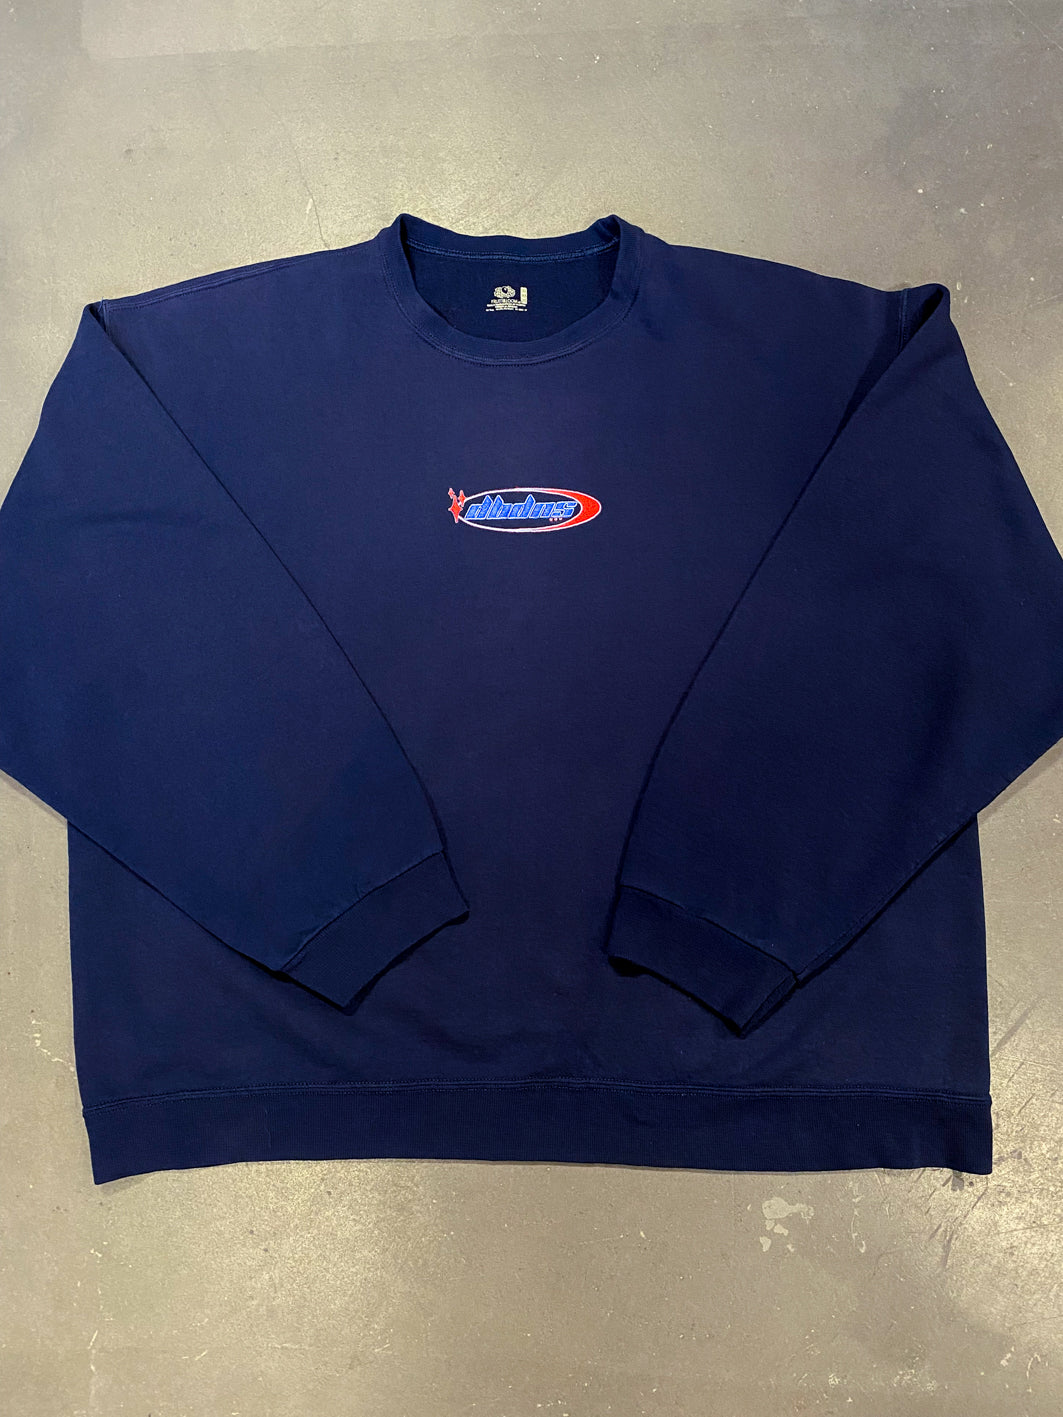 Reworked FOTL Sweatshirt in Navy with Logo Embroidery